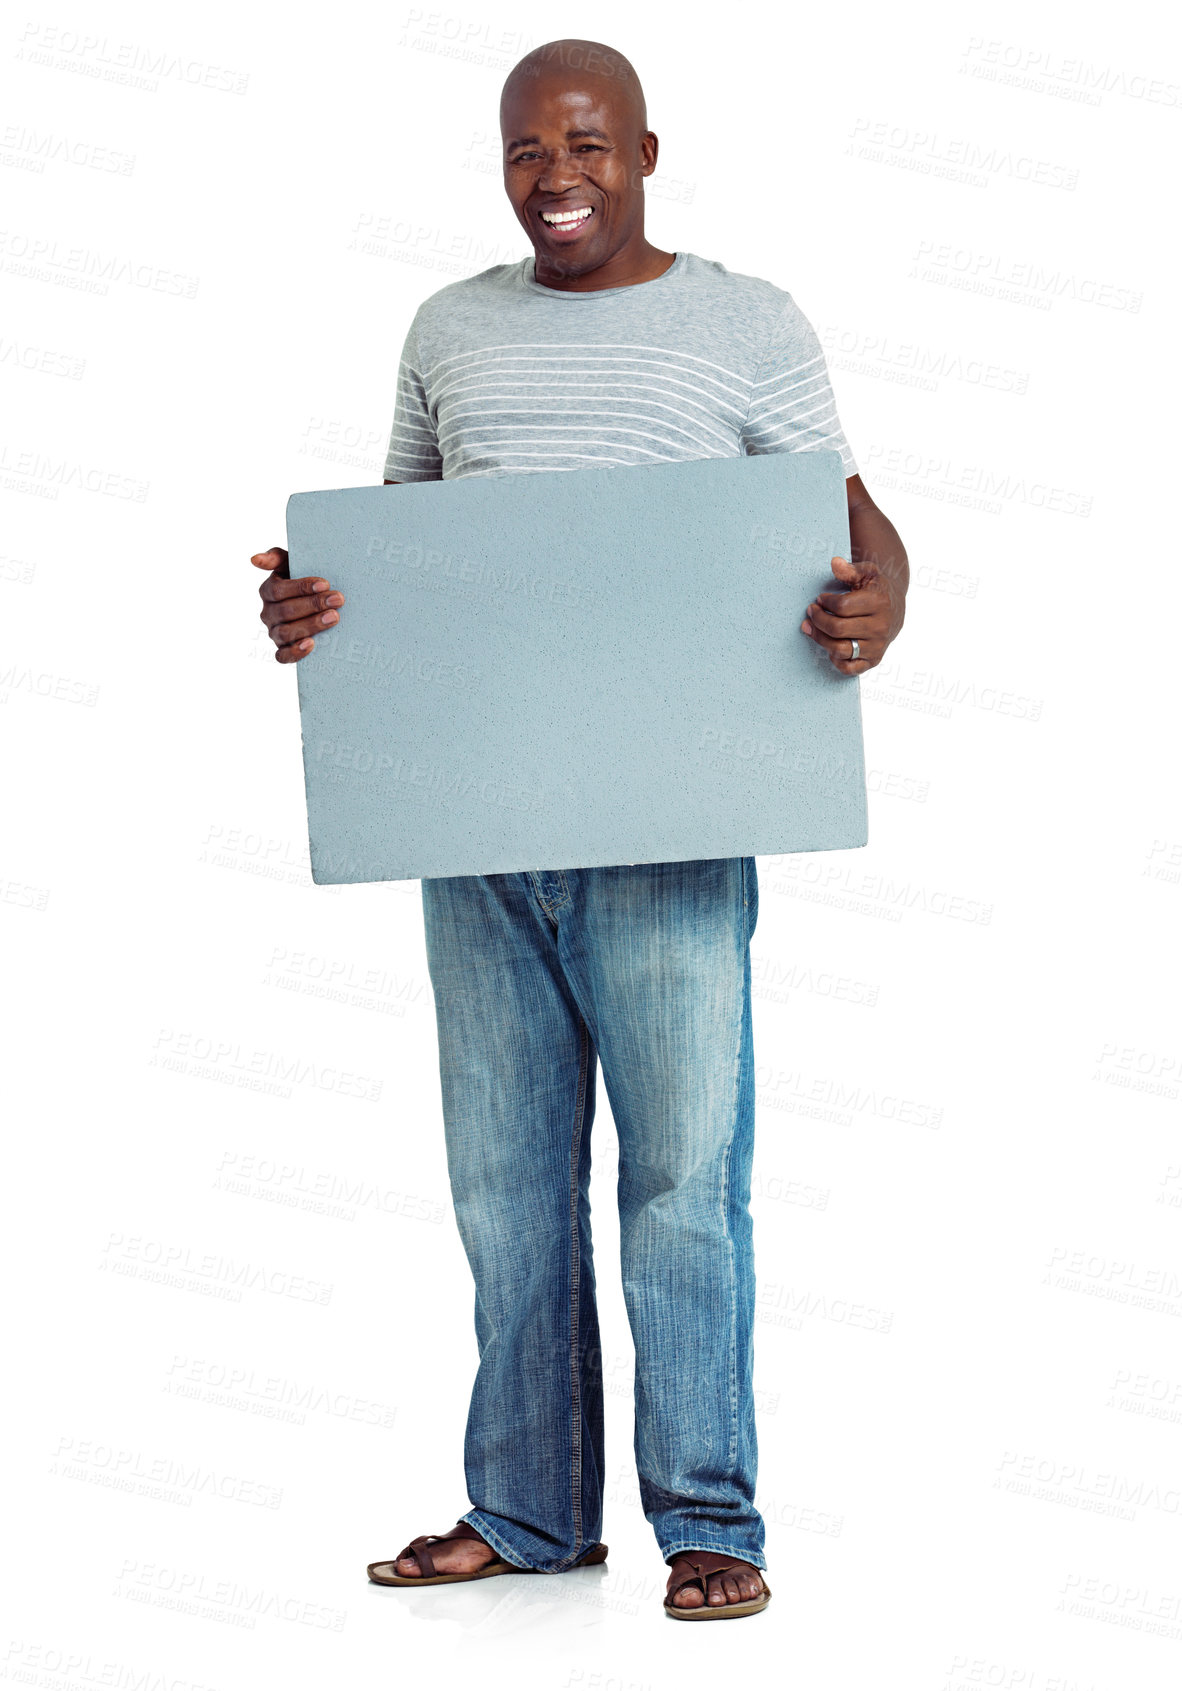 Buy stock photo Studio shot of an african man holding up a blank board against a white background